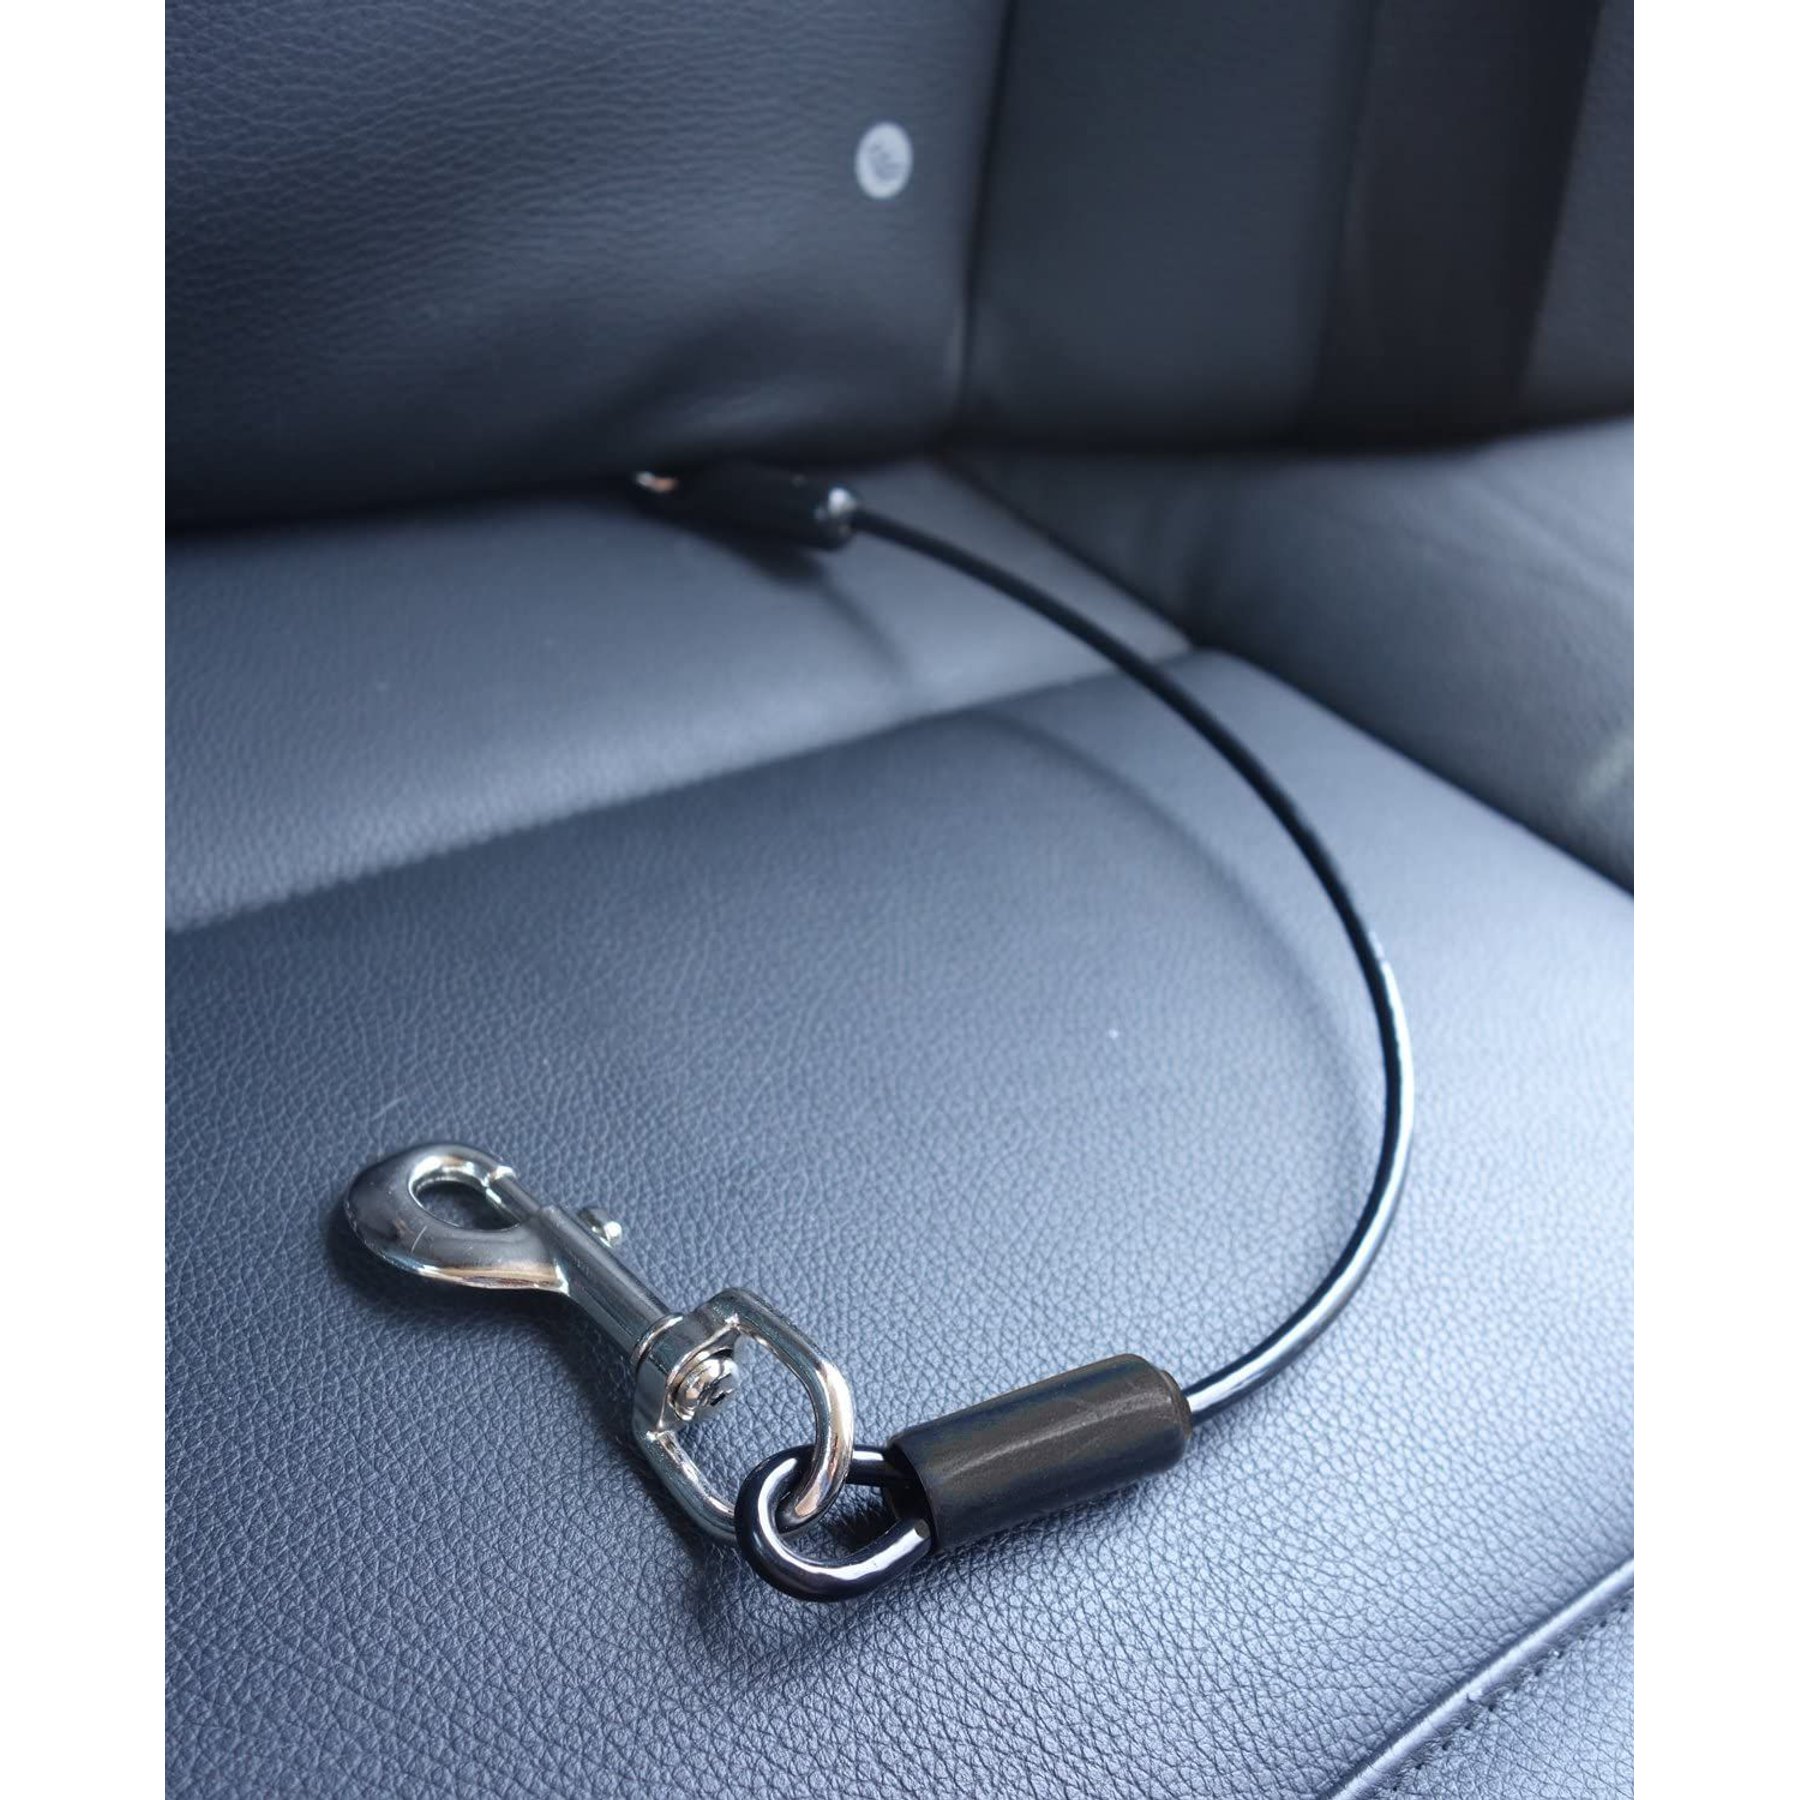 High Road Large Metal Car Seat Hooks For Purses And Bags - Unbreakable Car Headrest Hooks, Holds Double Purse Straps And Multiple Bags With Secure